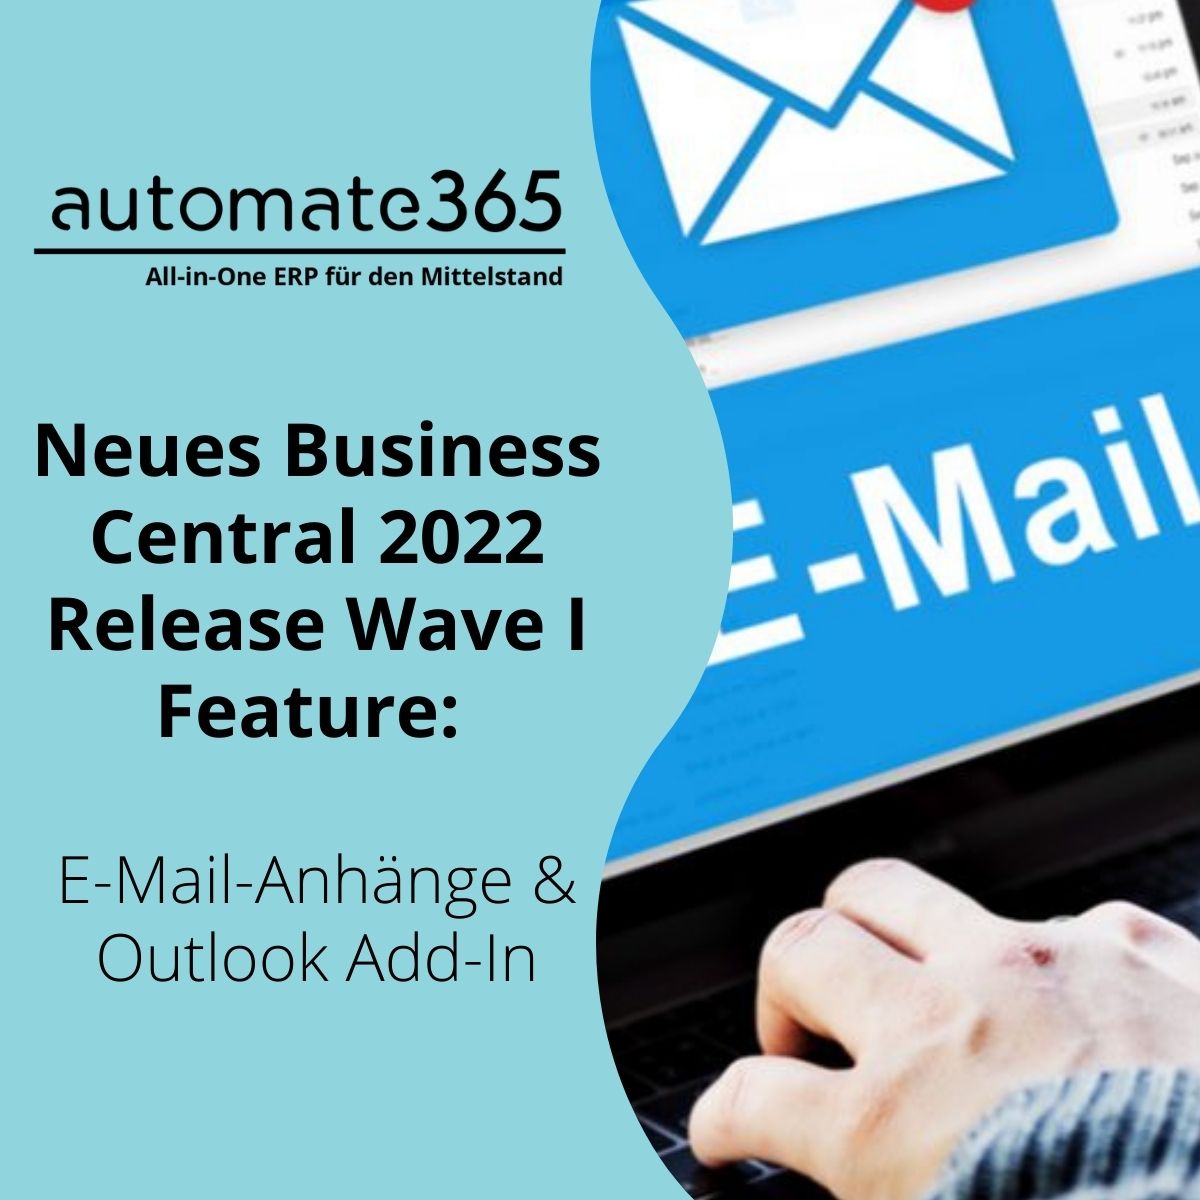 Neues Feature der 2022 Business Central Release Wave I